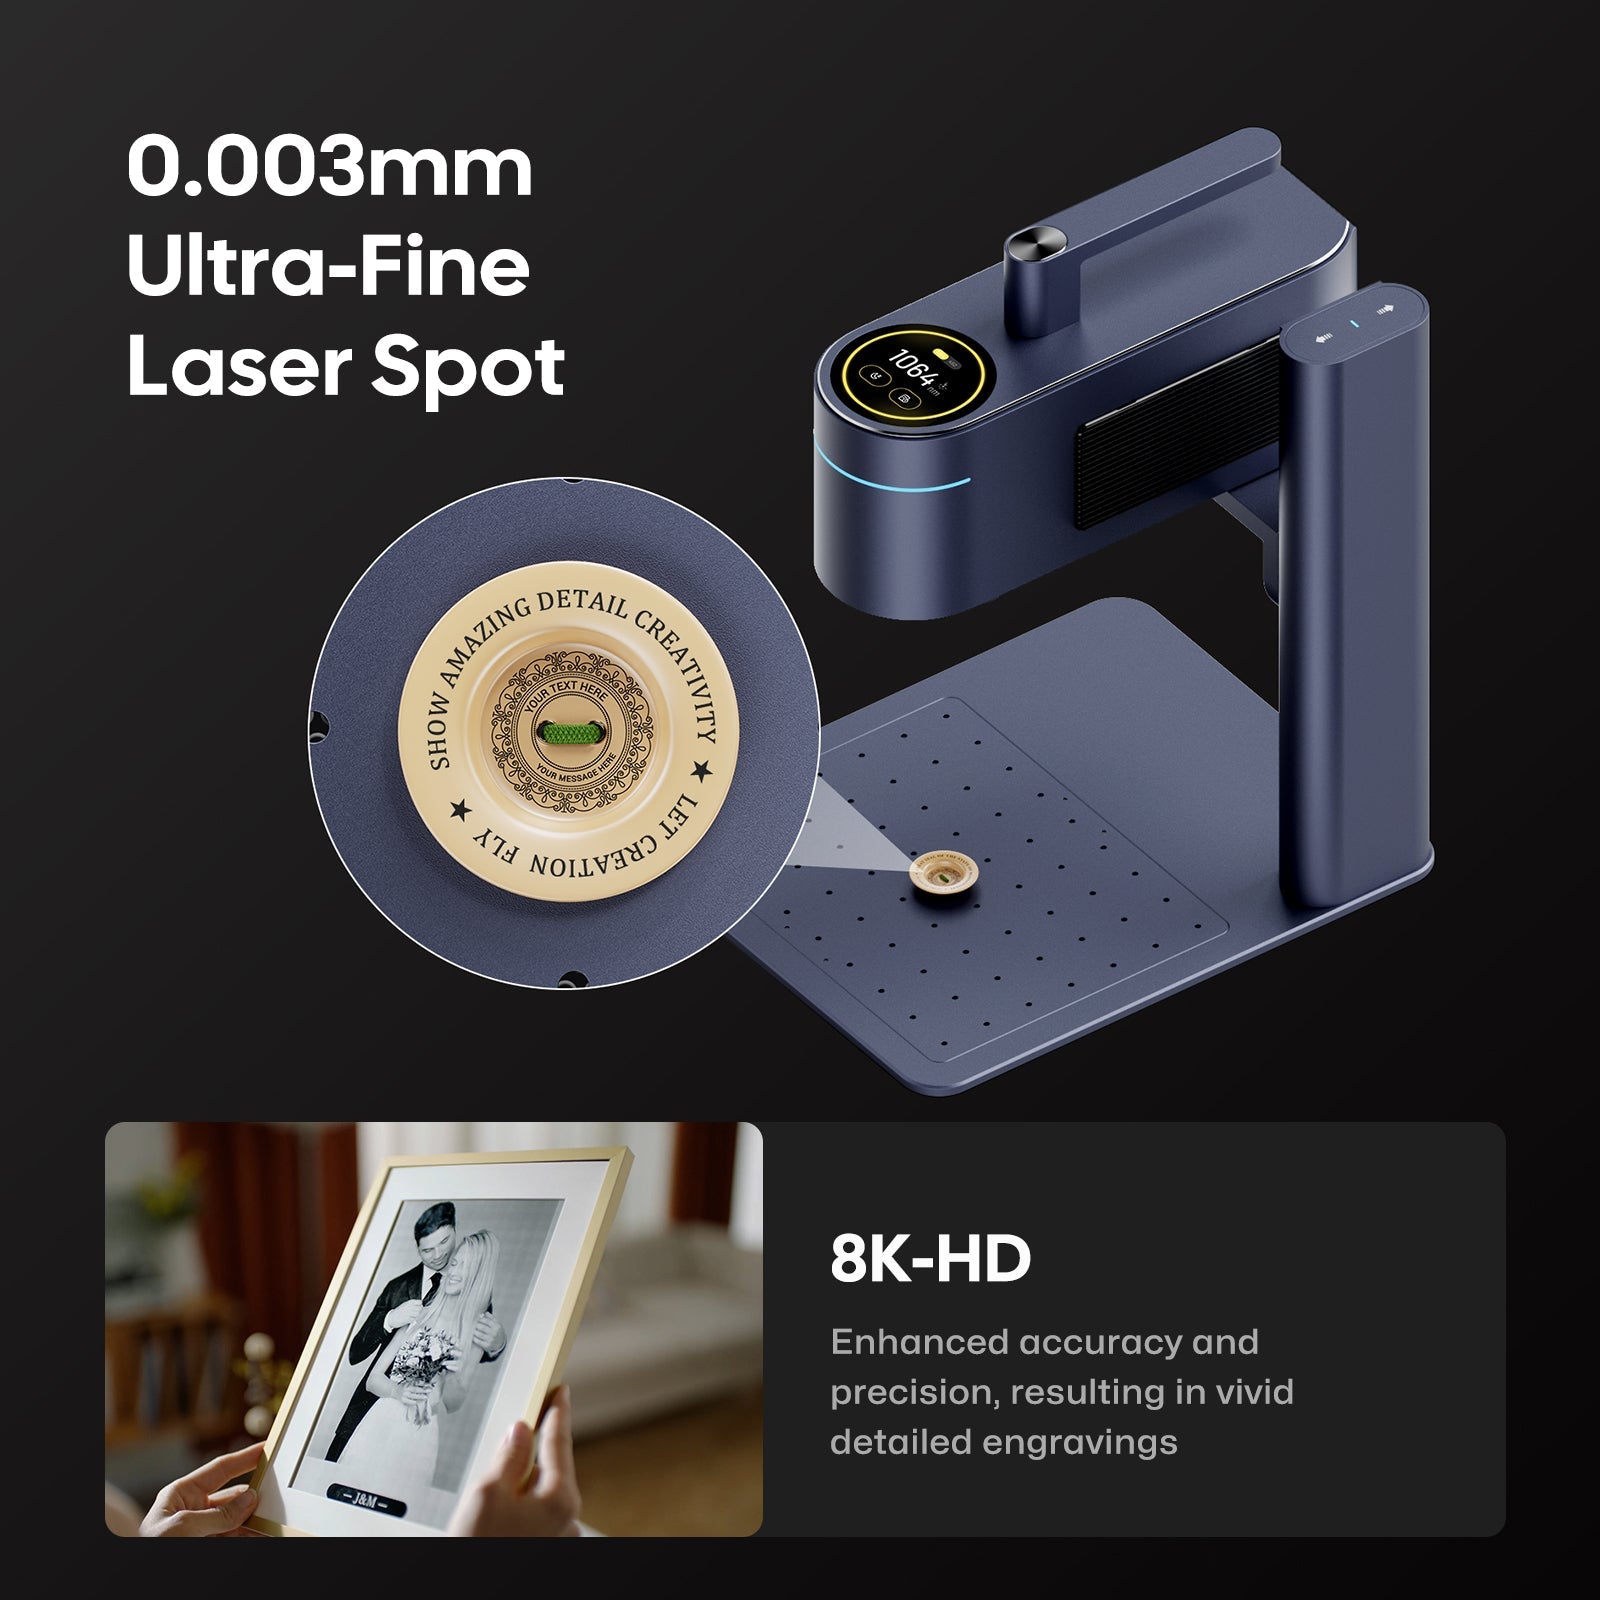 Up to 8K high resolution and 0.003mm ultra fine laser spot